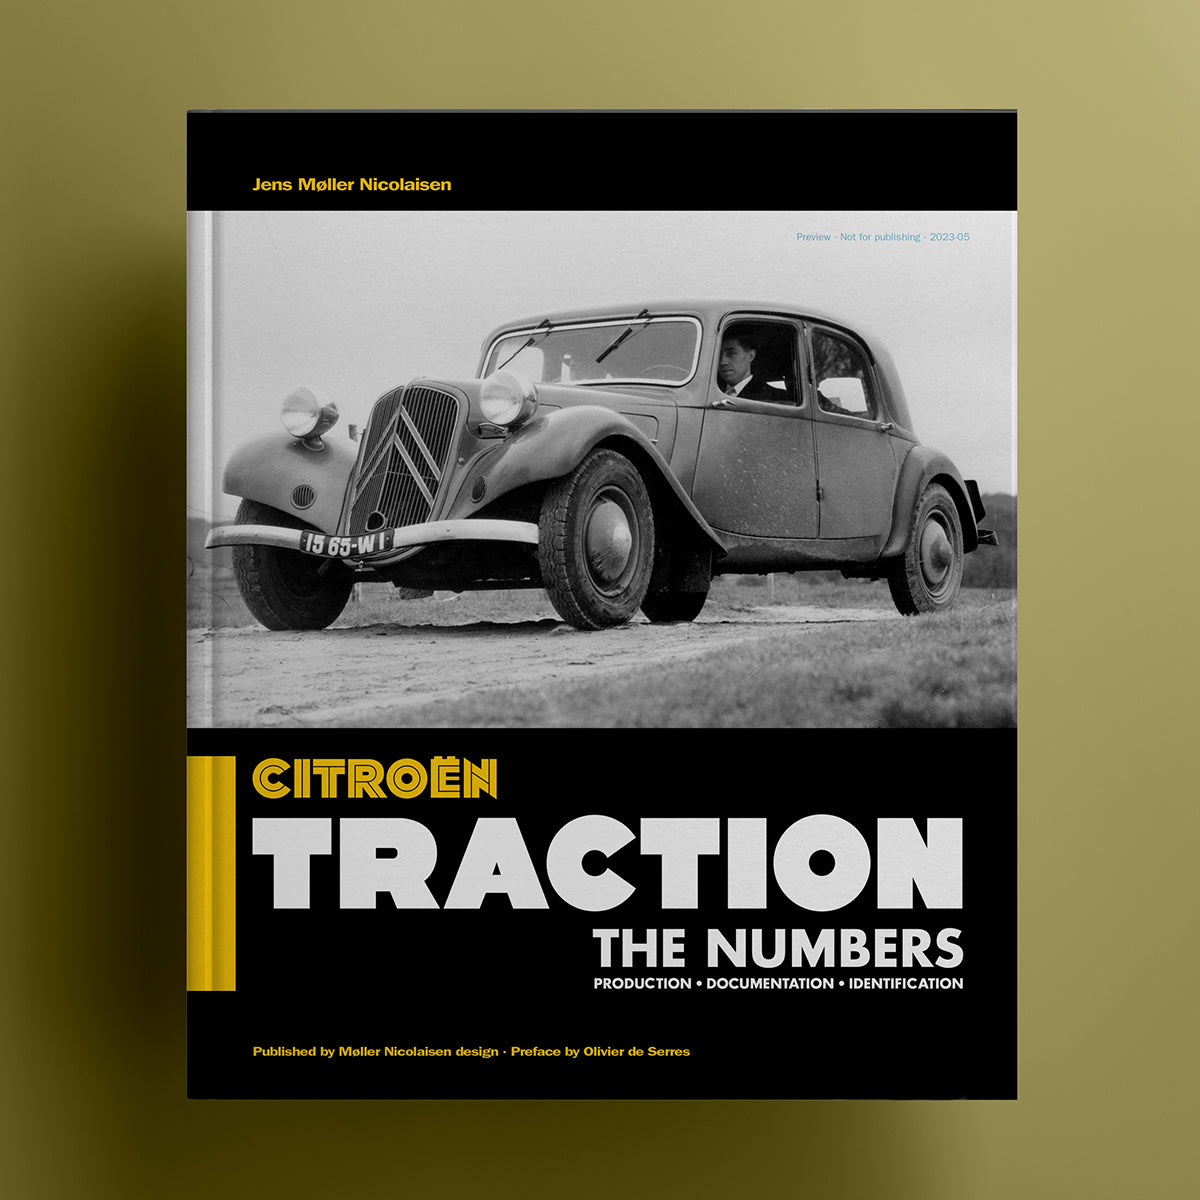 Citroën Traction - The numbers